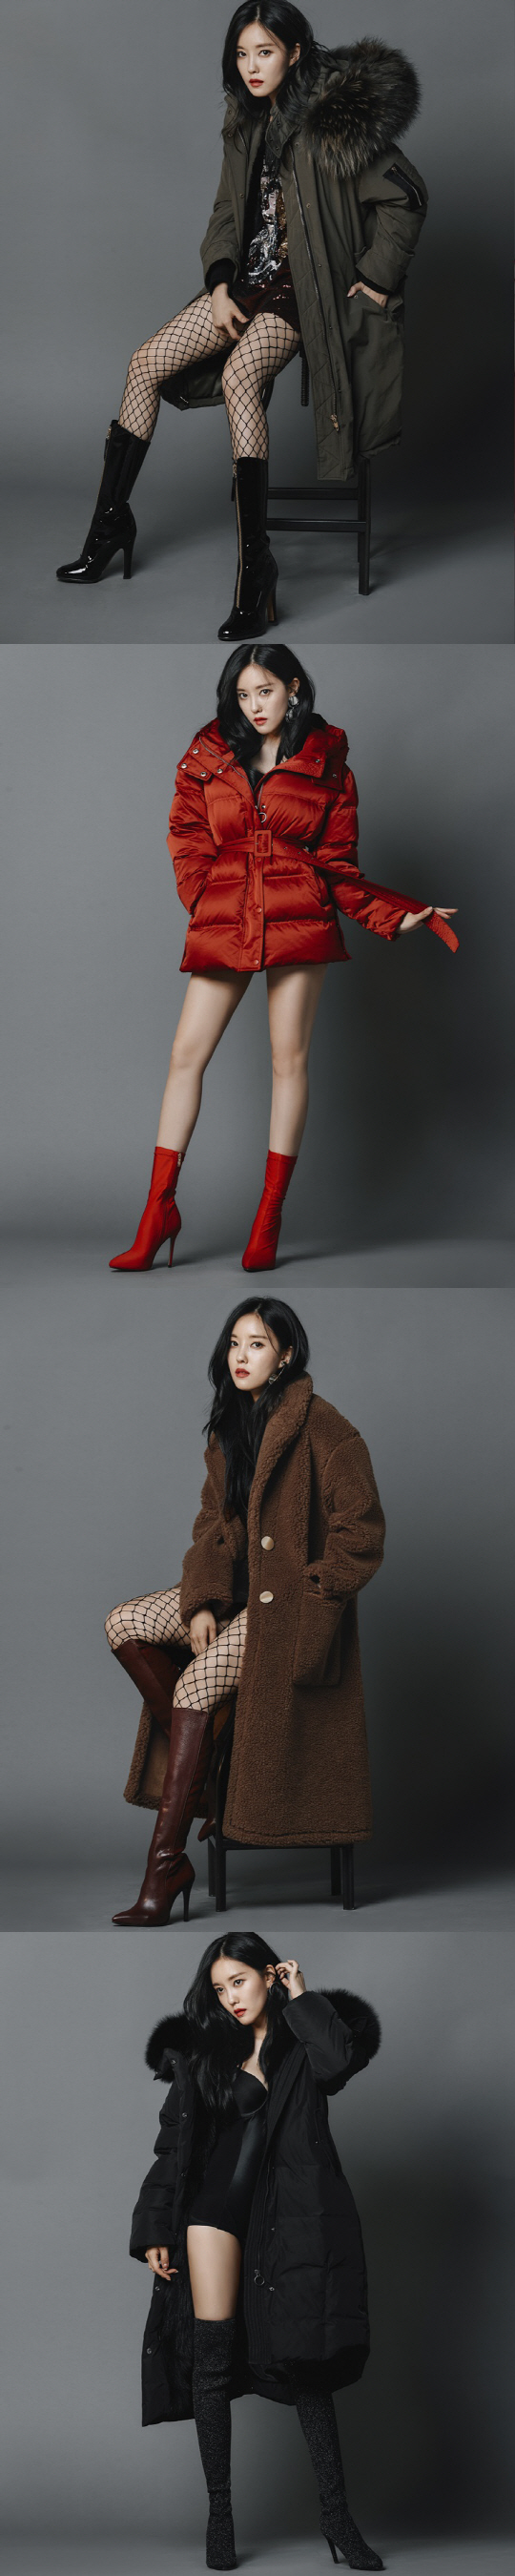 Singer Hyomin has emanated an intense Charisma.Hyomin released a new picture on the 19th, which is active as a Muse.In this picture, Hyomin has received a lot of praise from the staff on the spot by creating various poses and expressions ranging from provocative sexy to sophisticated chic.Hyomin was Loved a lot through the digital single Mango (MANGO).